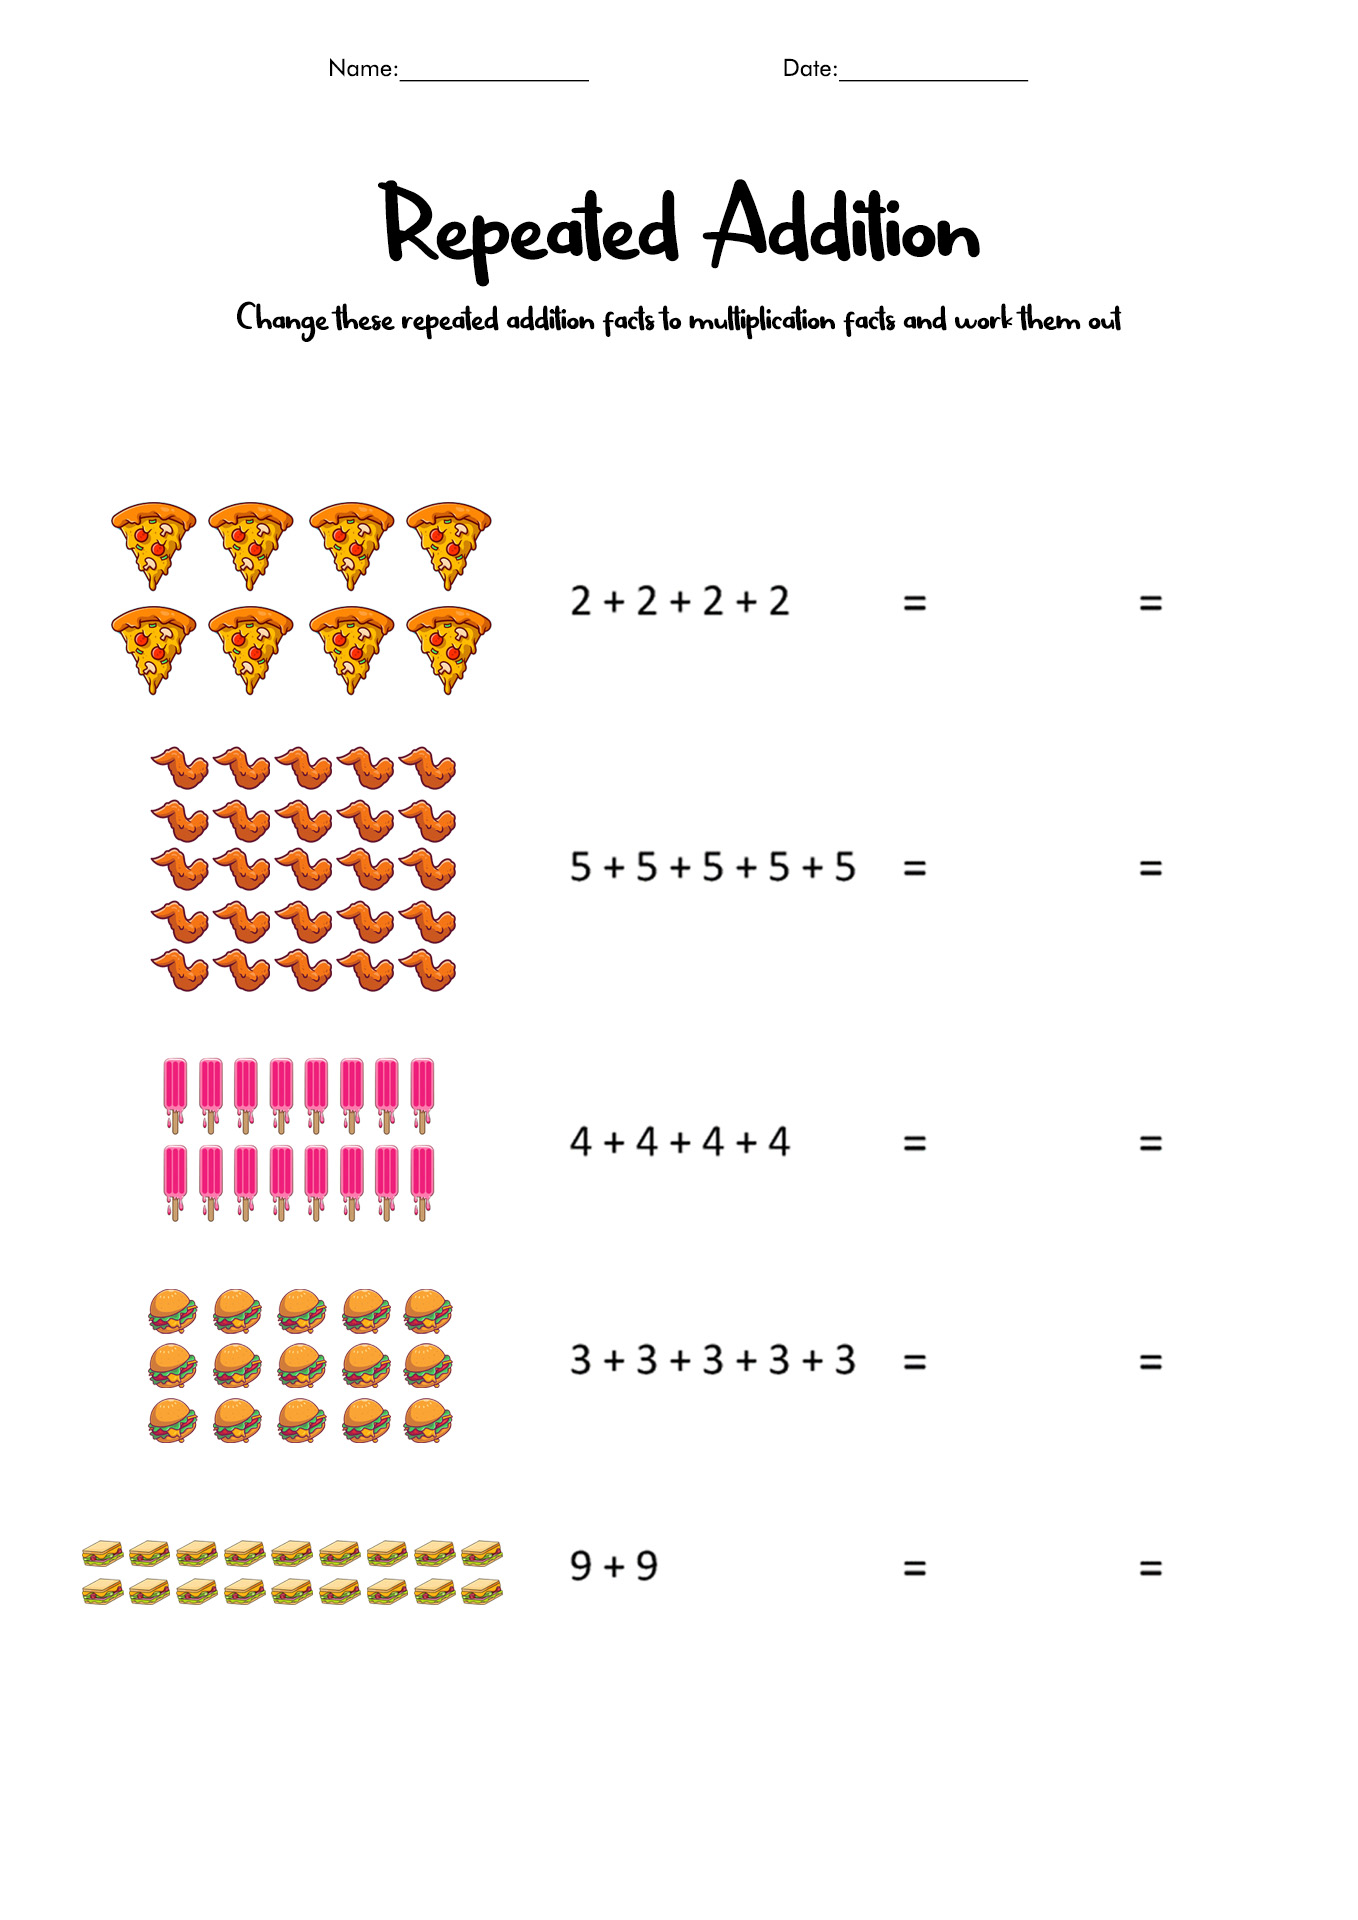 16-best-images-of-addition-arrays-worksheets-multiplication-repeated